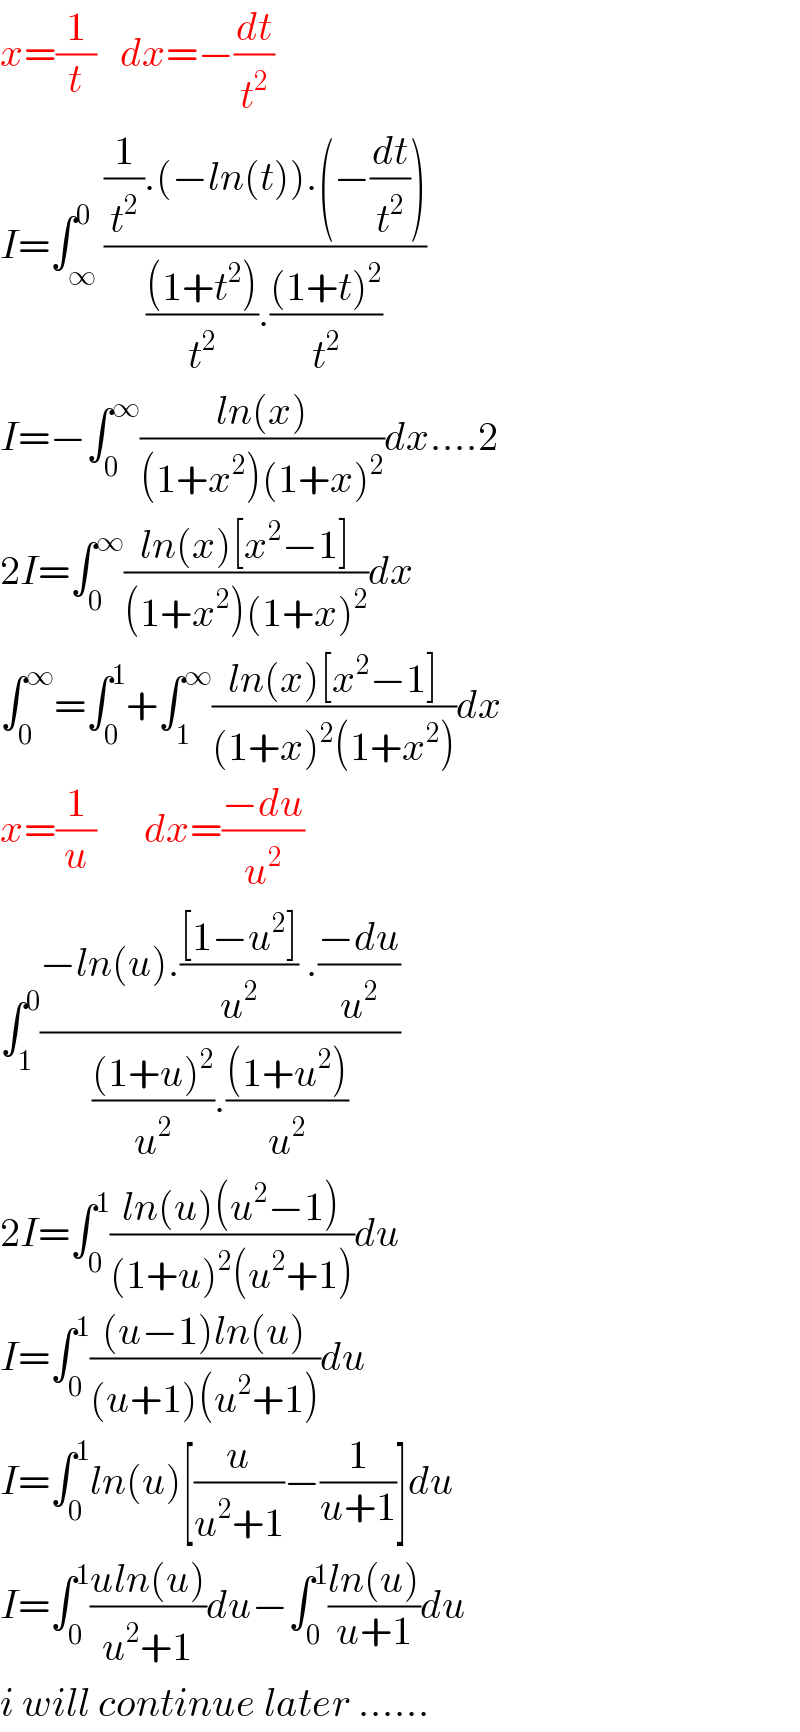 x=(1/t)   dx=−(dt/t^2 )  I=∫_∞ ^0 (((1/t^2 ).(−ln(t)).(−(dt/t^2 )))/((((1+t^2 ))/t^2 ).(((1+t)^2 )/t^2 )))  I=−∫_0 ^∞ ((ln(x))/((1+x^2 )(1+x)^2 ))dx....2  2I=∫_0 ^∞ ((ln(x)[x^2 −1])/((1+x^2 )(1+x)^2 ))dx  ∫_0 ^∞ =∫_0 ^1 +∫_1 ^∞ ((ln(x)[x^2 −1])/((1+x)^2 (1+x^2 )))dx  x=(1/u)      dx=((−du)/u^2 )  ∫_1 ^0 ((−ln(u).(([1−u^2 ])/u^2 ) .((−du)/u^2 ))/((((1+u)^2 )/u^2 ).(((1+u^2 ))/u^2 )))  2I=∫_0 ^1 ((ln(u)(u^2 −1))/((1+u)^2 (u^2 +1)))du  I=∫_0 ^1 (((u−1)ln(u))/((u+1)(u^2 +1)))du  I=∫_0 ^1 ln(u)[(u/(u^2 +1))−(1/(u+1))]du  I=∫_0 ^1 ((uln(u))/(u^2 +1))du−∫_0 ^1 ((ln(u))/(u+1))du  i will continue later ......  